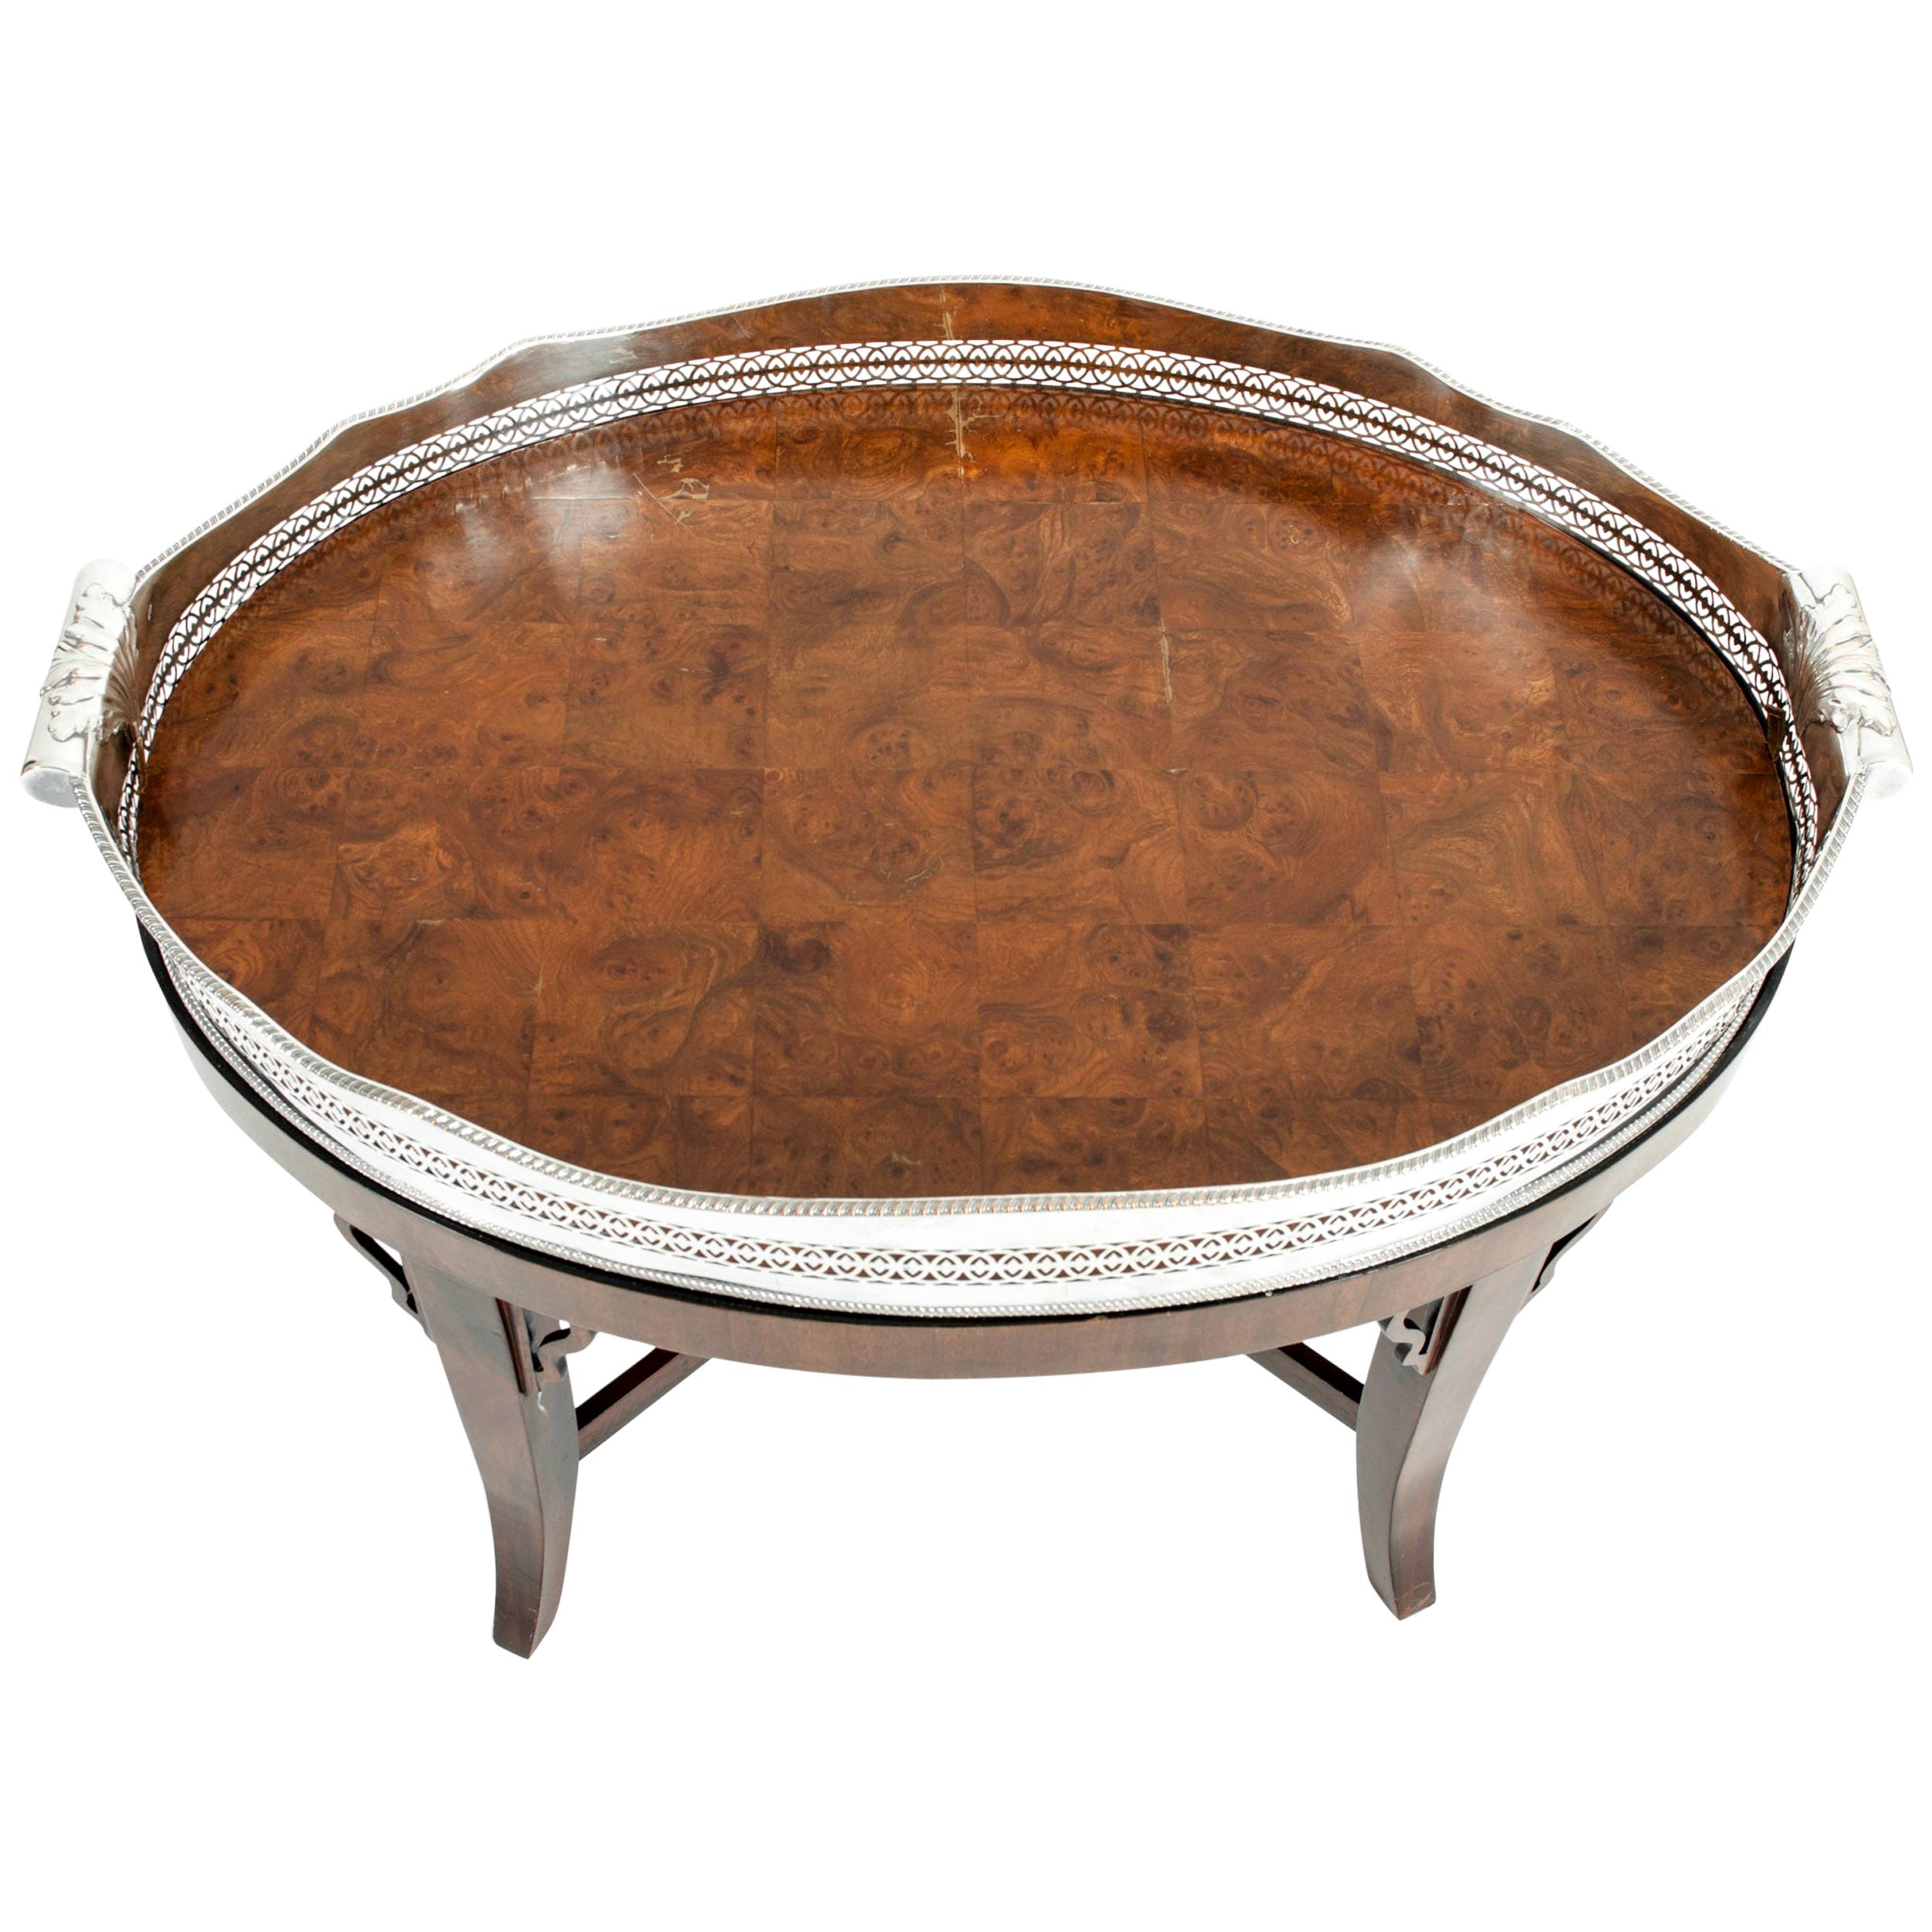 Mid-20th Century Plated High Gallery / Wood Interior Tray Table